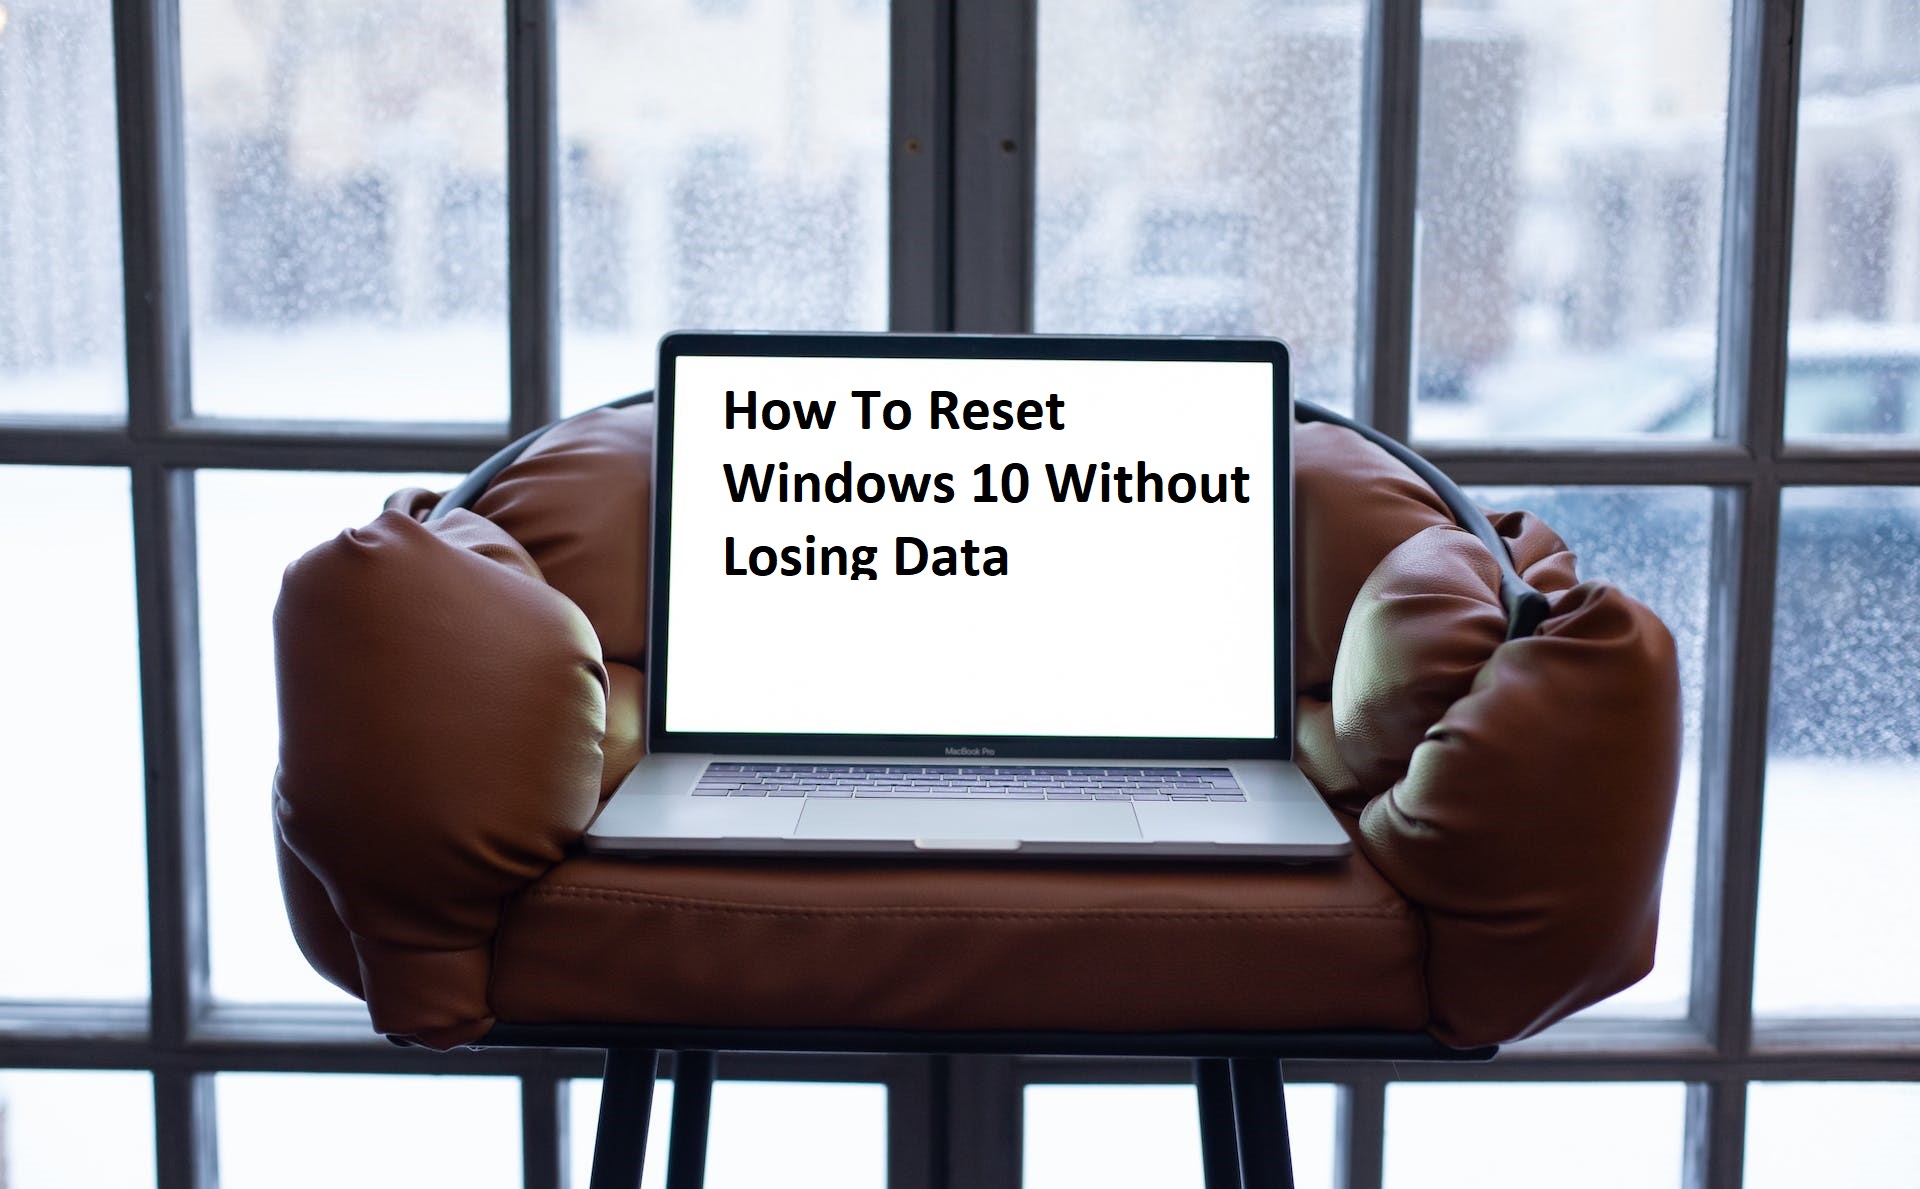 How to reset Windows 10 without losing data